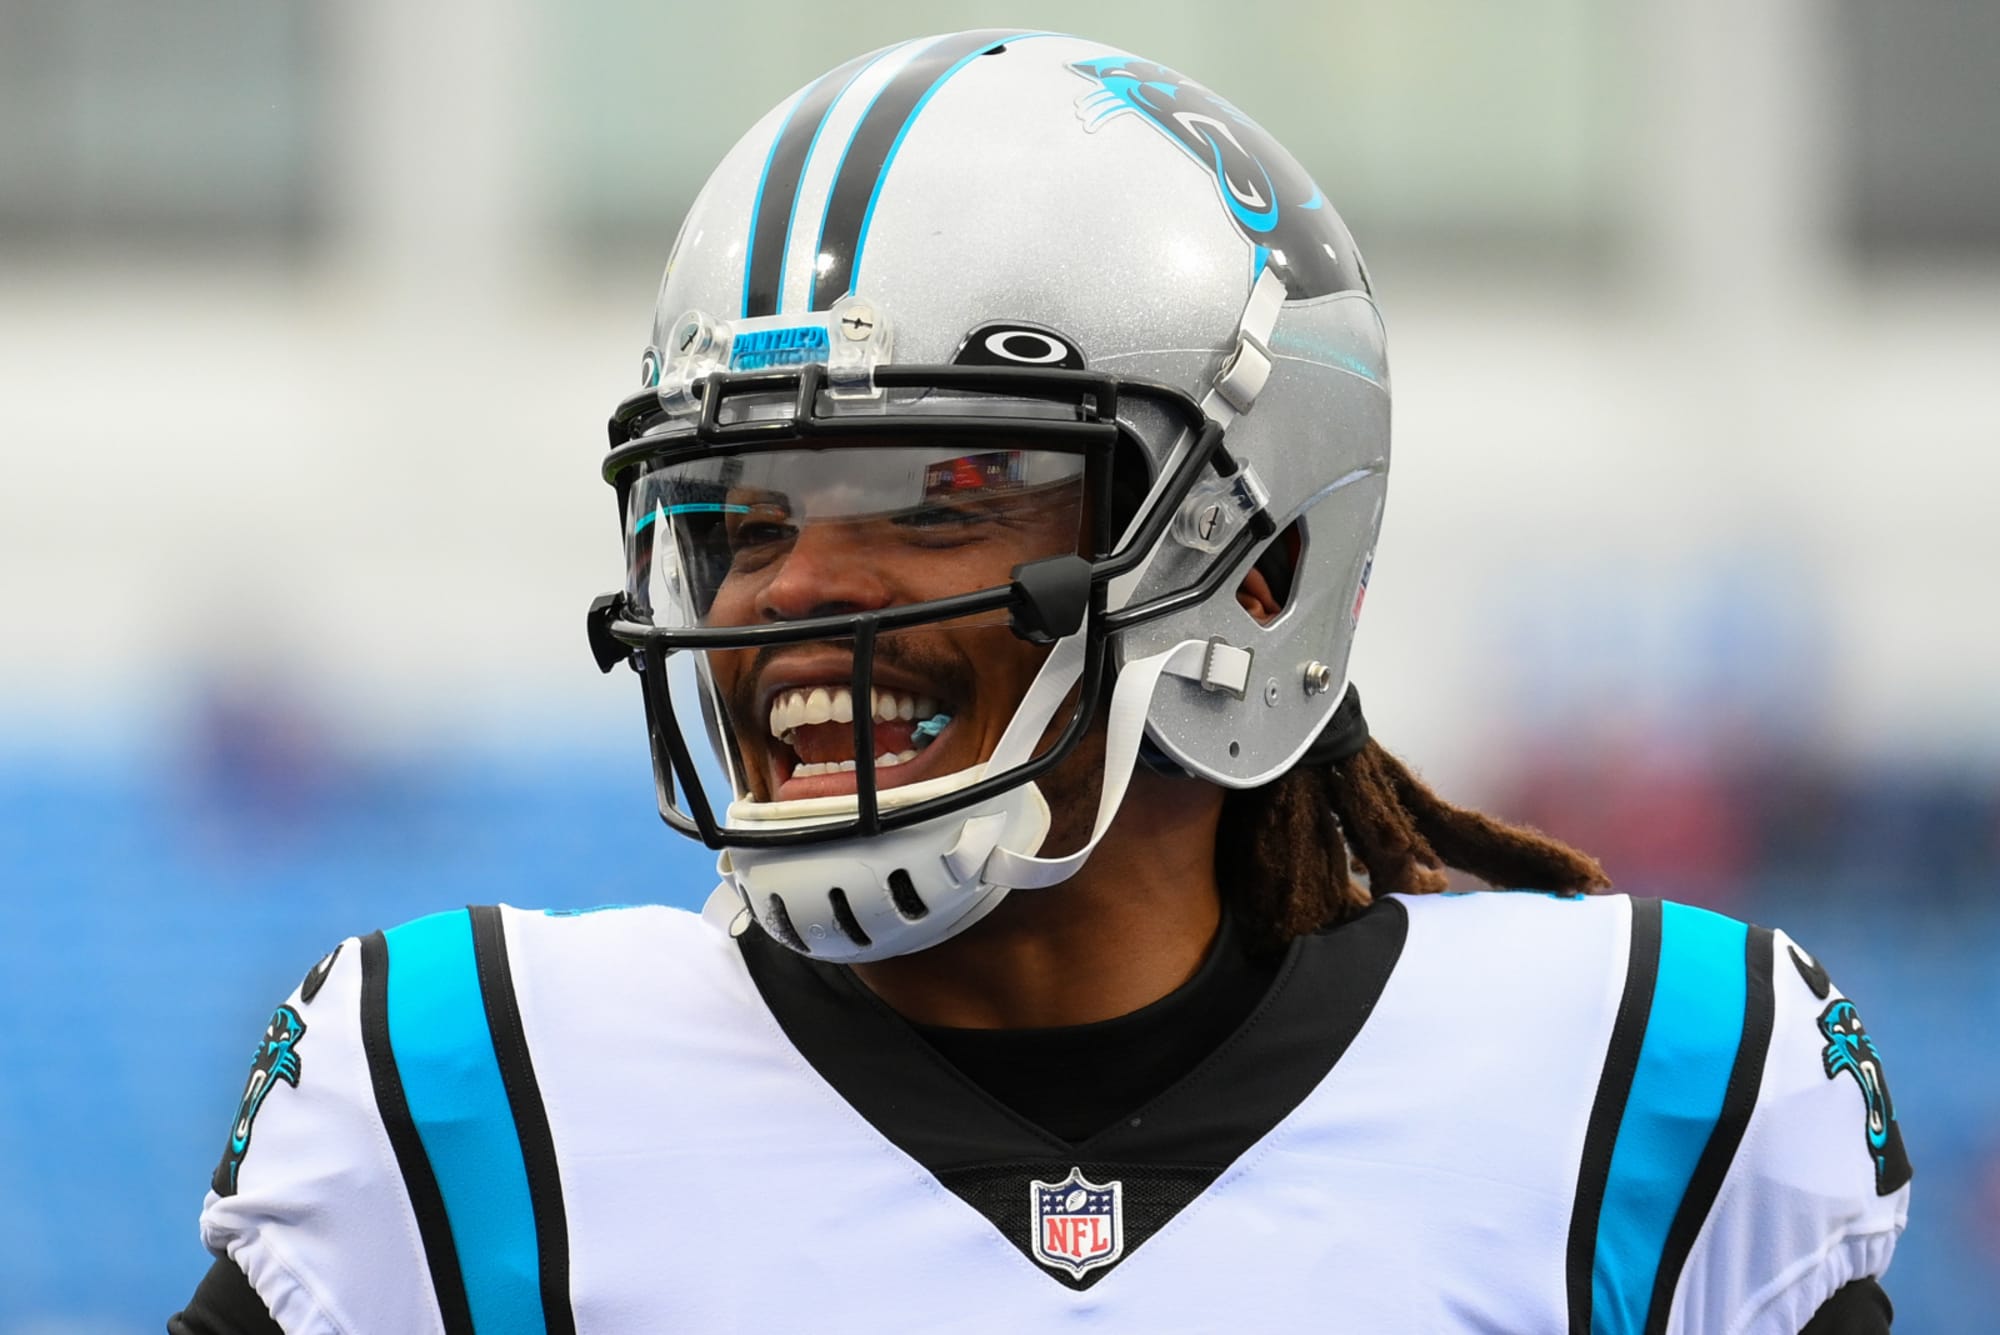 Should the Carolina Panthers consider calling Cam Newton again?